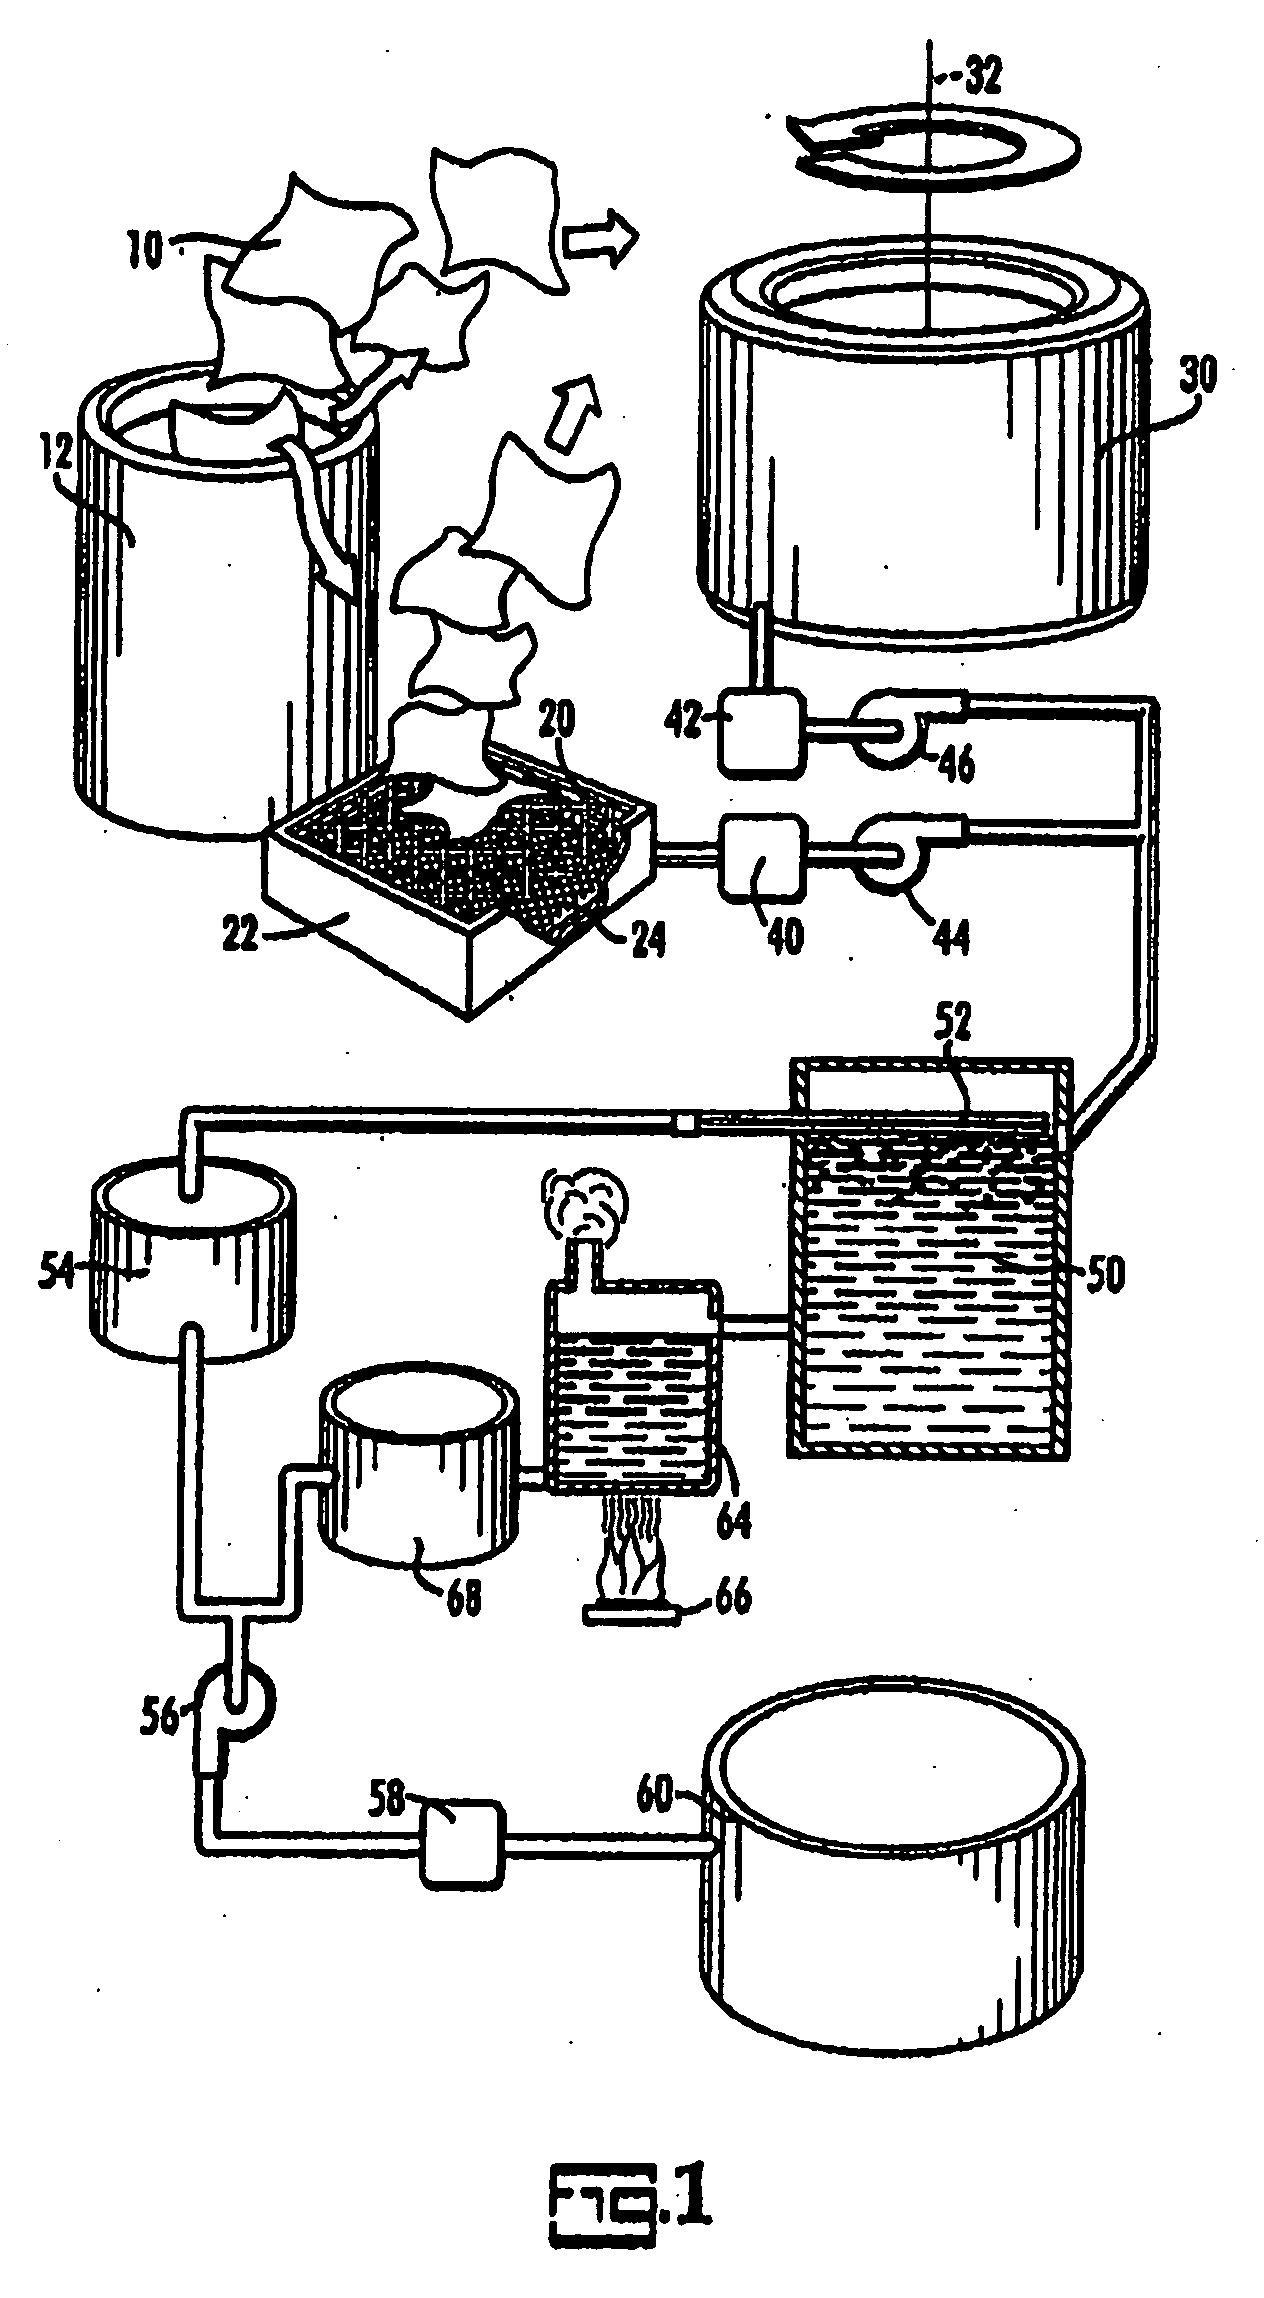 Cleaning fluid and methods